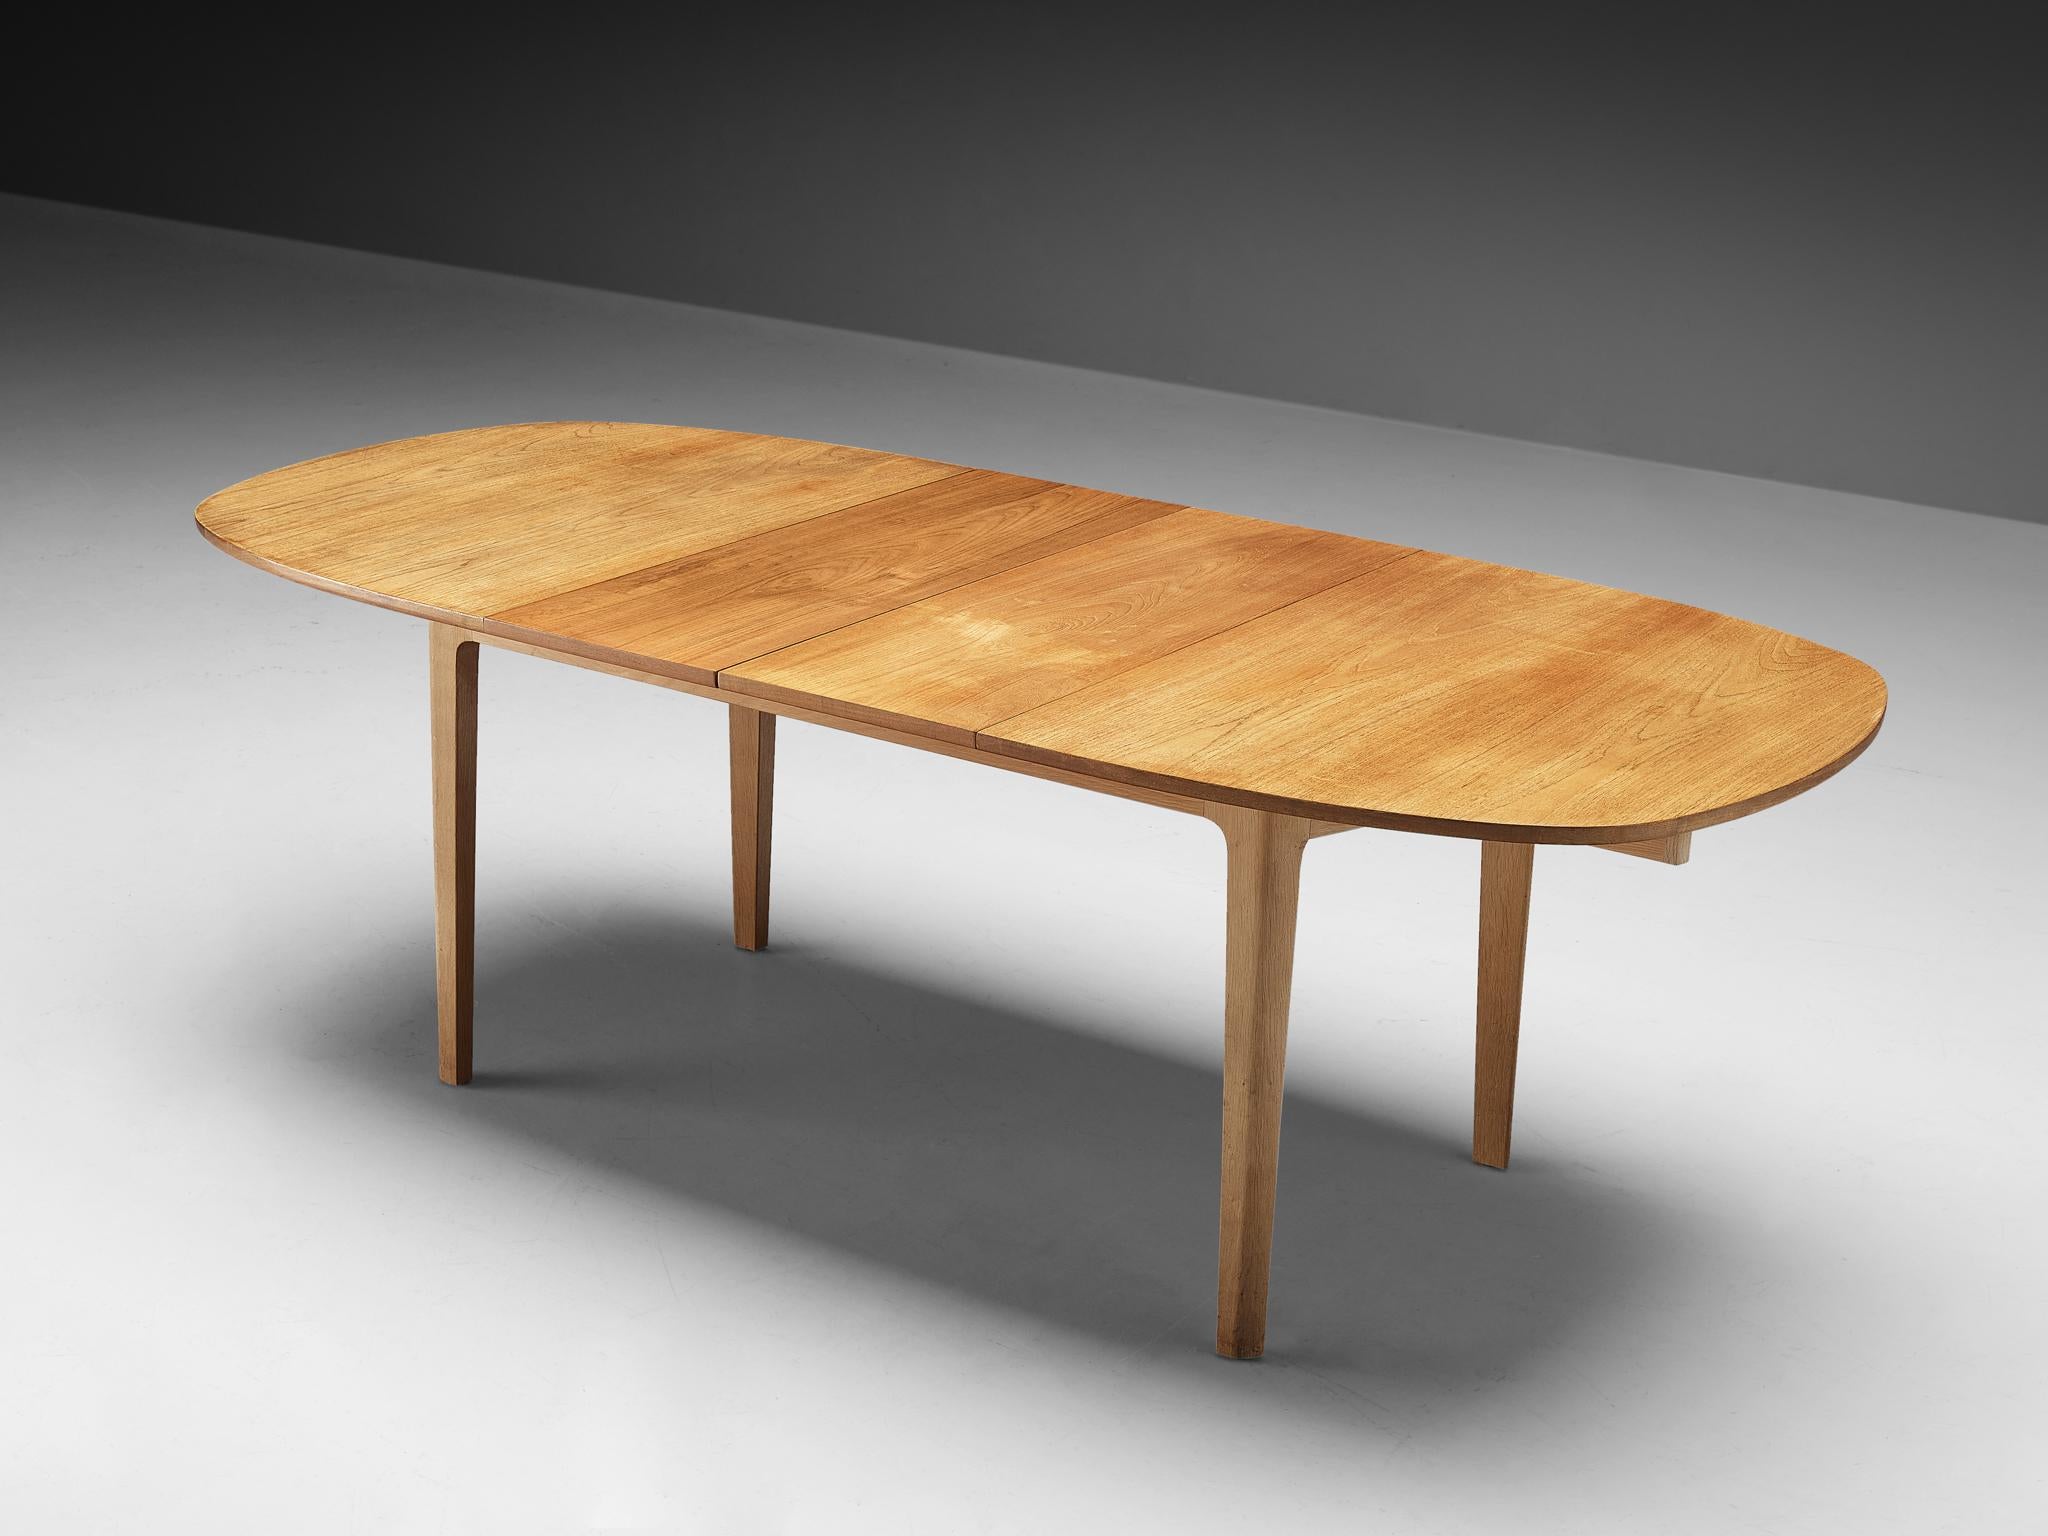 Extendable dining table, oak, Denmark, 1960s

This table shows a nice construction based on elegant lines and round shapes. The rectangular table top has rounded corners and is suited with one extension leave. Therefore, its size can be adjusted